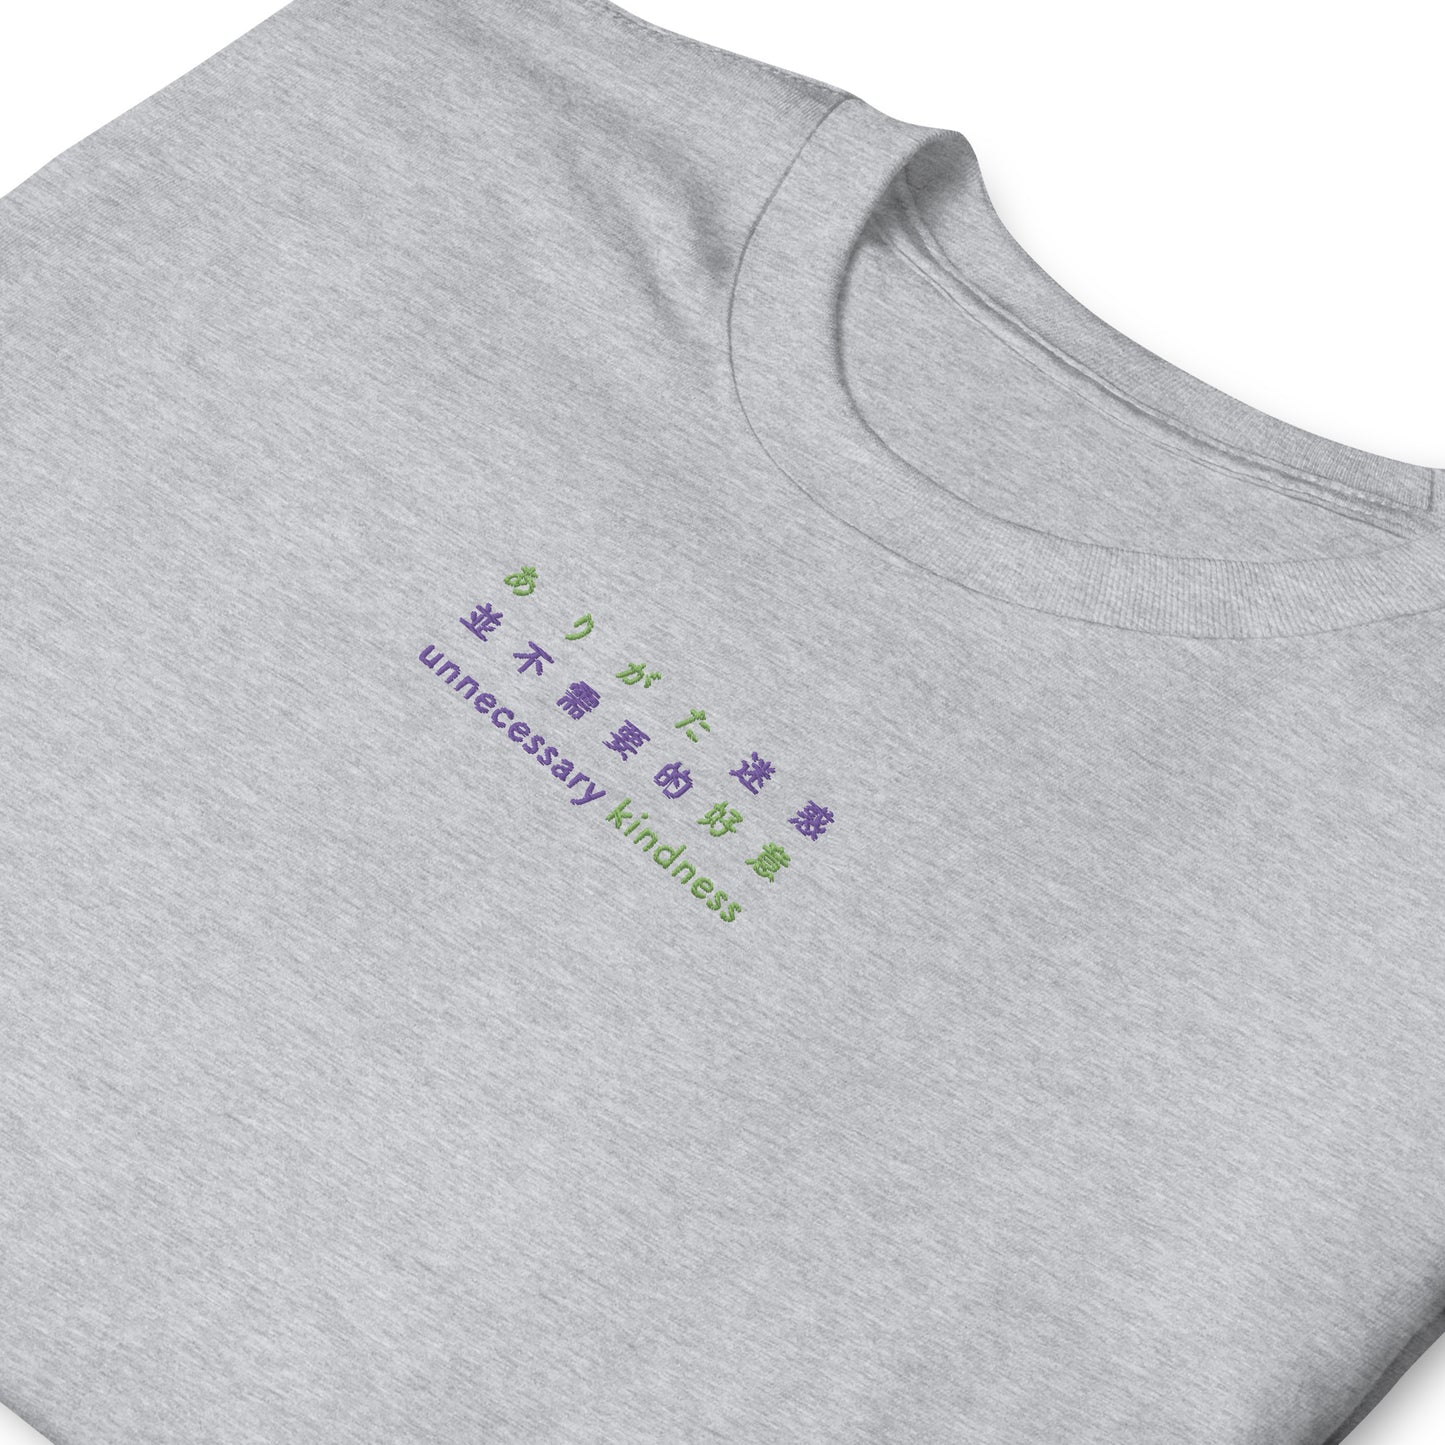 Light Gray High Quality Tee - Front Design with Green and Purple Embroidery "Unnecessary Kindness" in Japanese ,Chinese and English